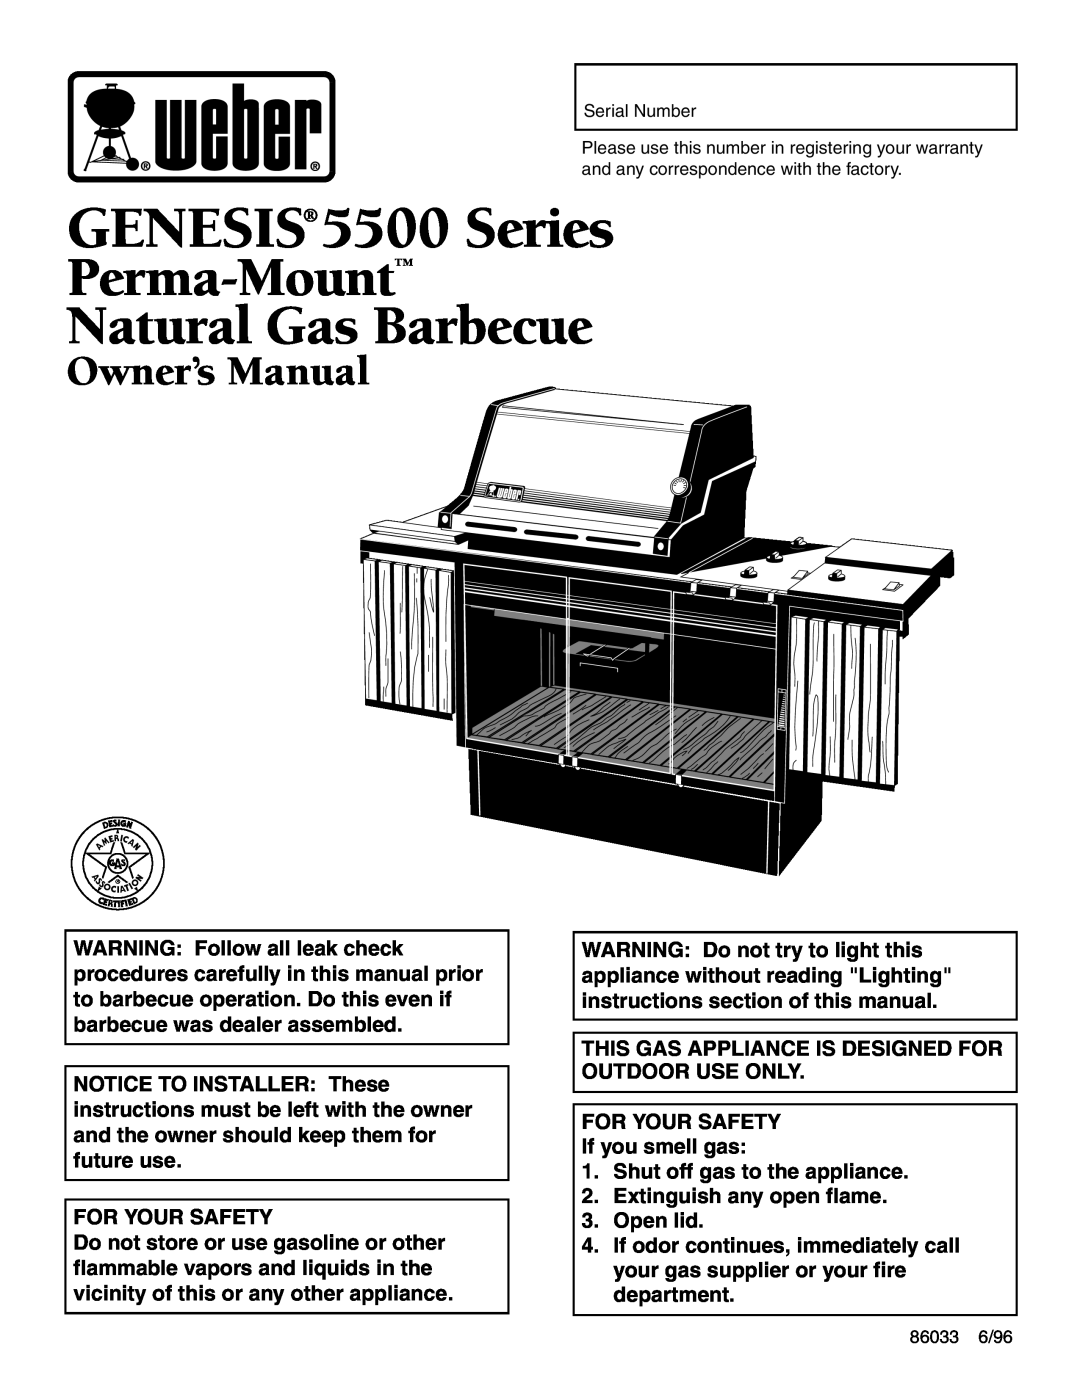 Weber owner manual GENESIS 5500 Series, Perma-Mount Natural Gas Barbecue, For Your Safety 